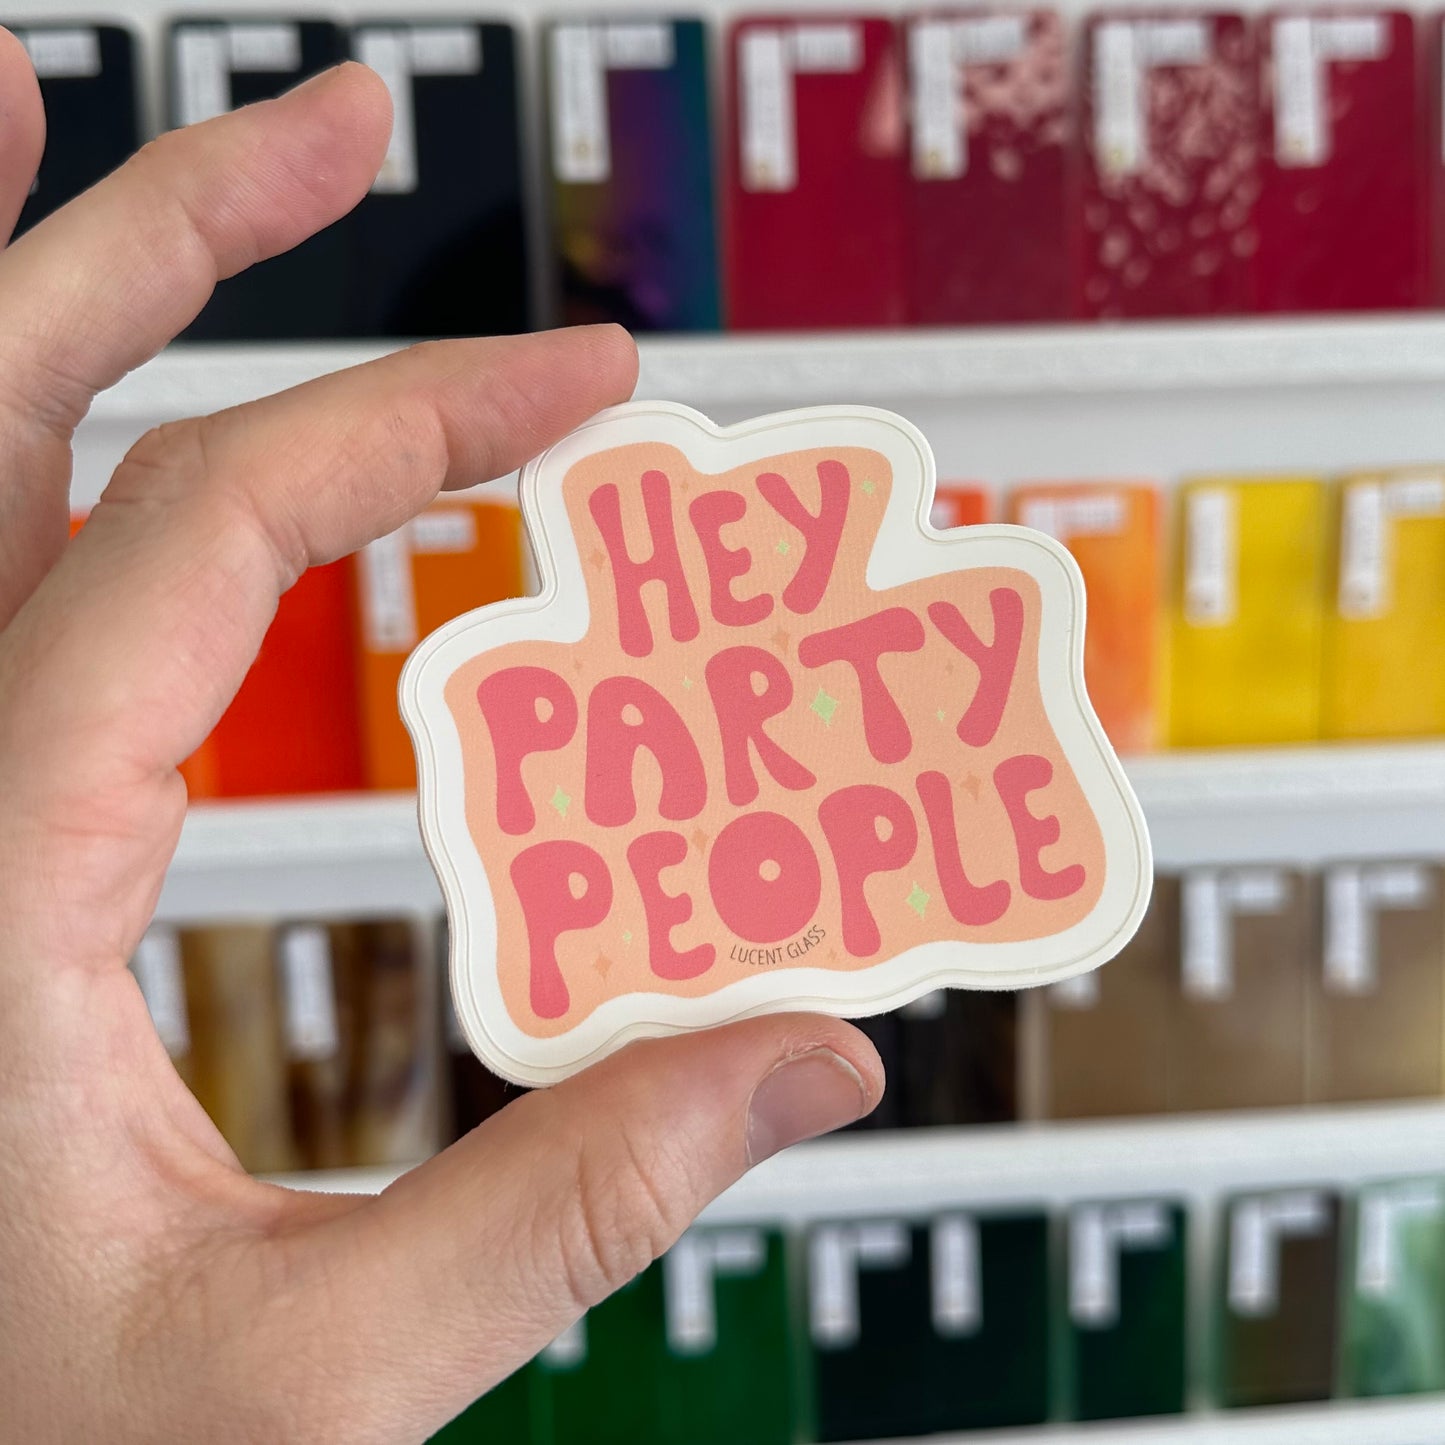 "Hey party people" sticker